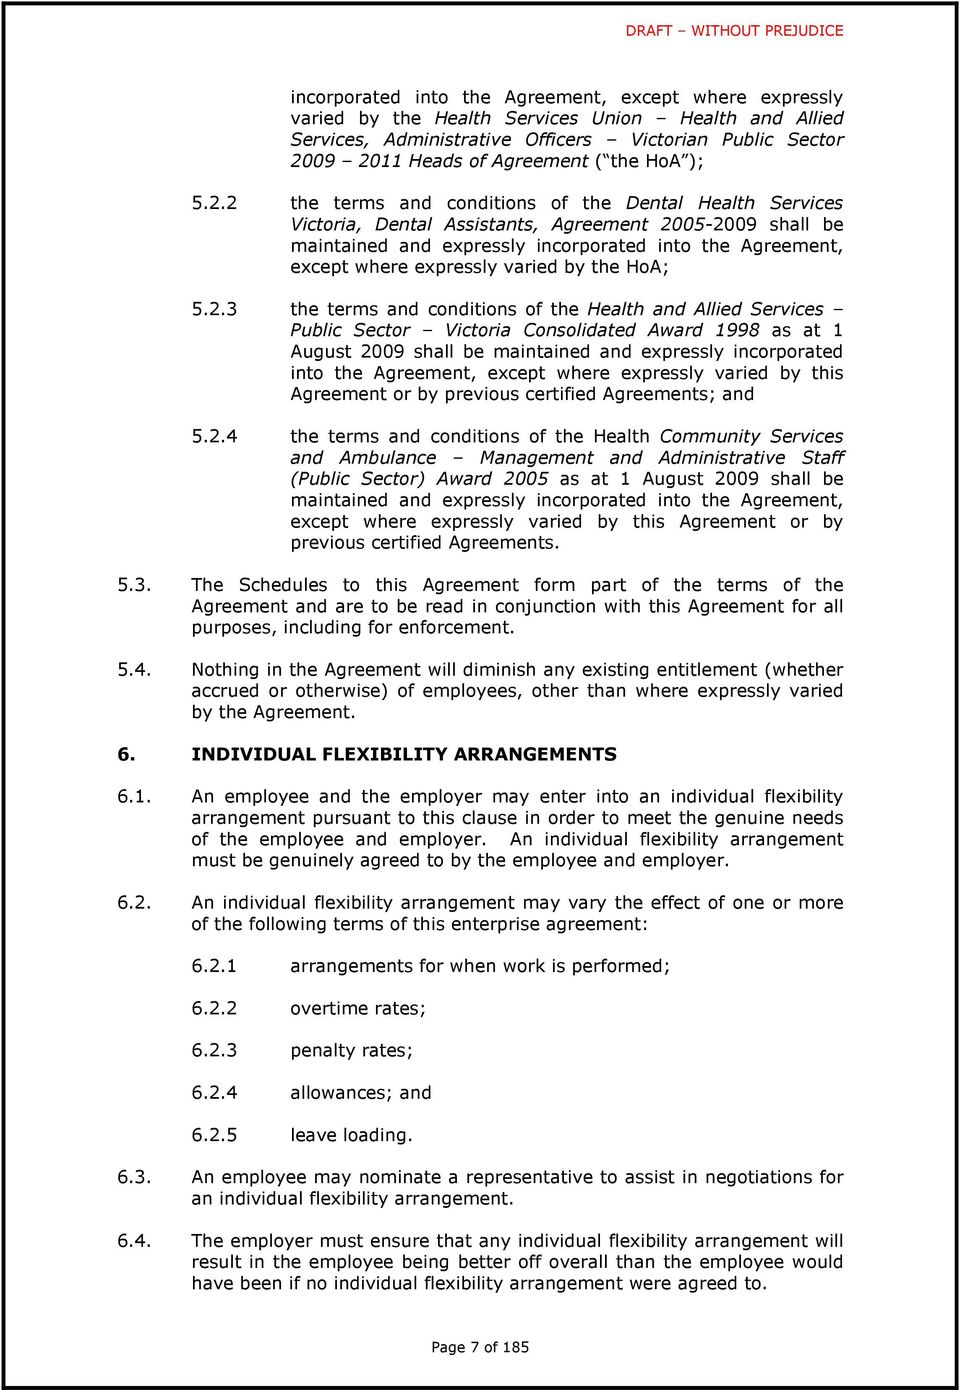 2 the terms and conditions of the Dental Health Services Victoria, Dental Assistants, Agreement 2005-2009 shall be maintained and expressly incorporated into the Agreement, except where expressly